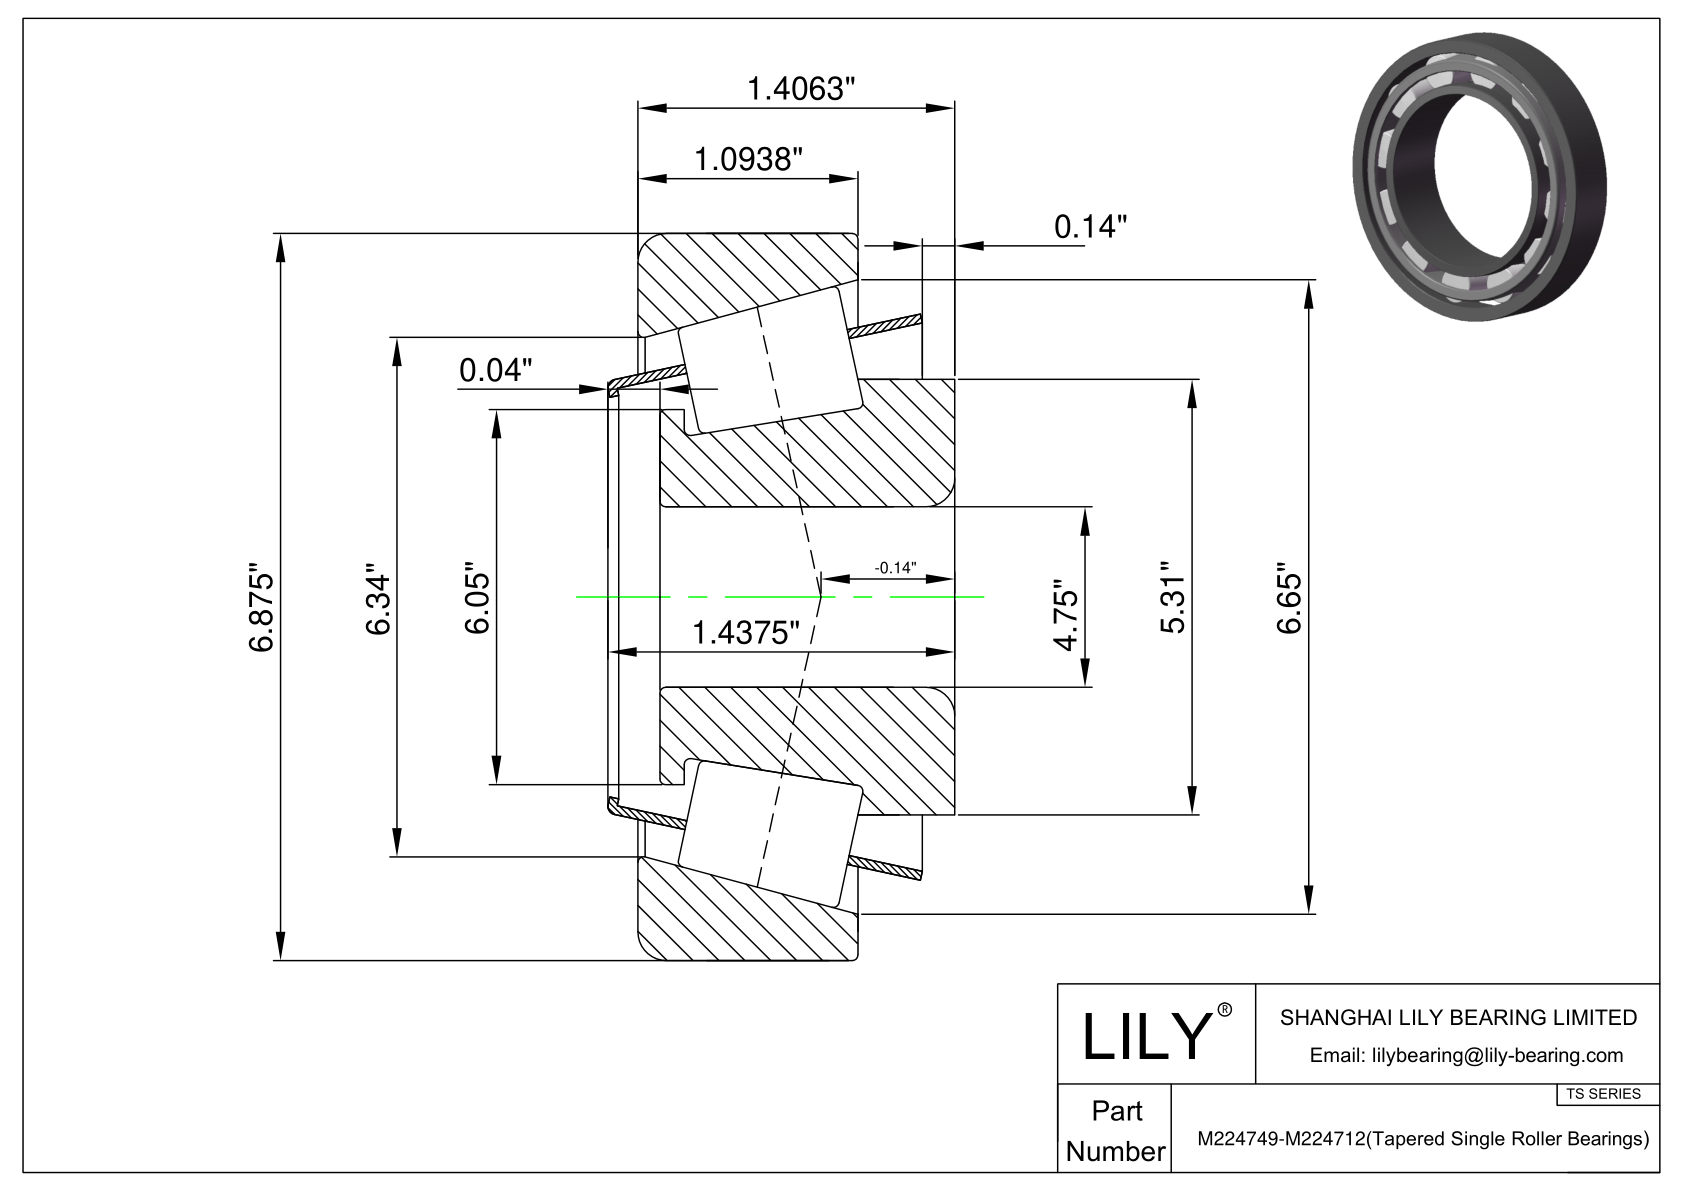 M224749-M224712 TS (Tapered Single Roller Bearings) (Imperial) cad drawing